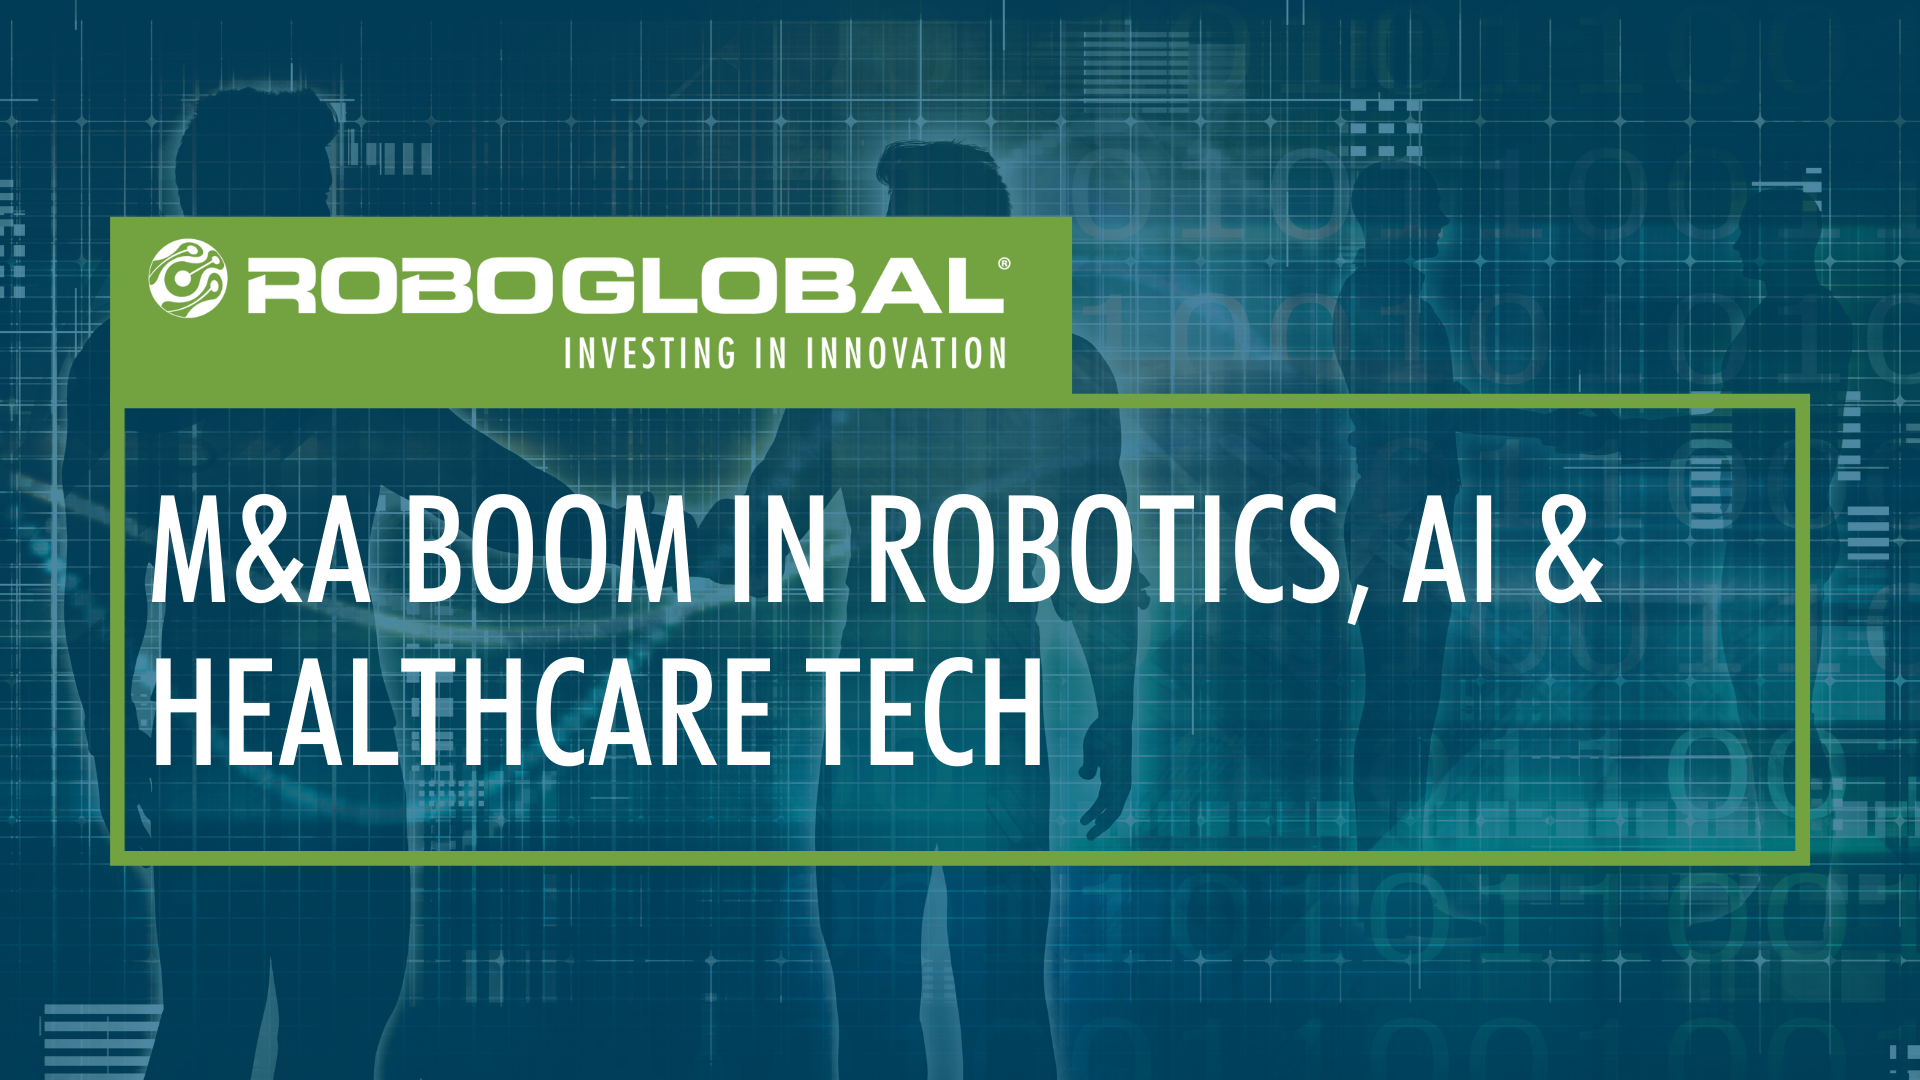 M&A Increase in Robotics, AI & Healthcare Know-how